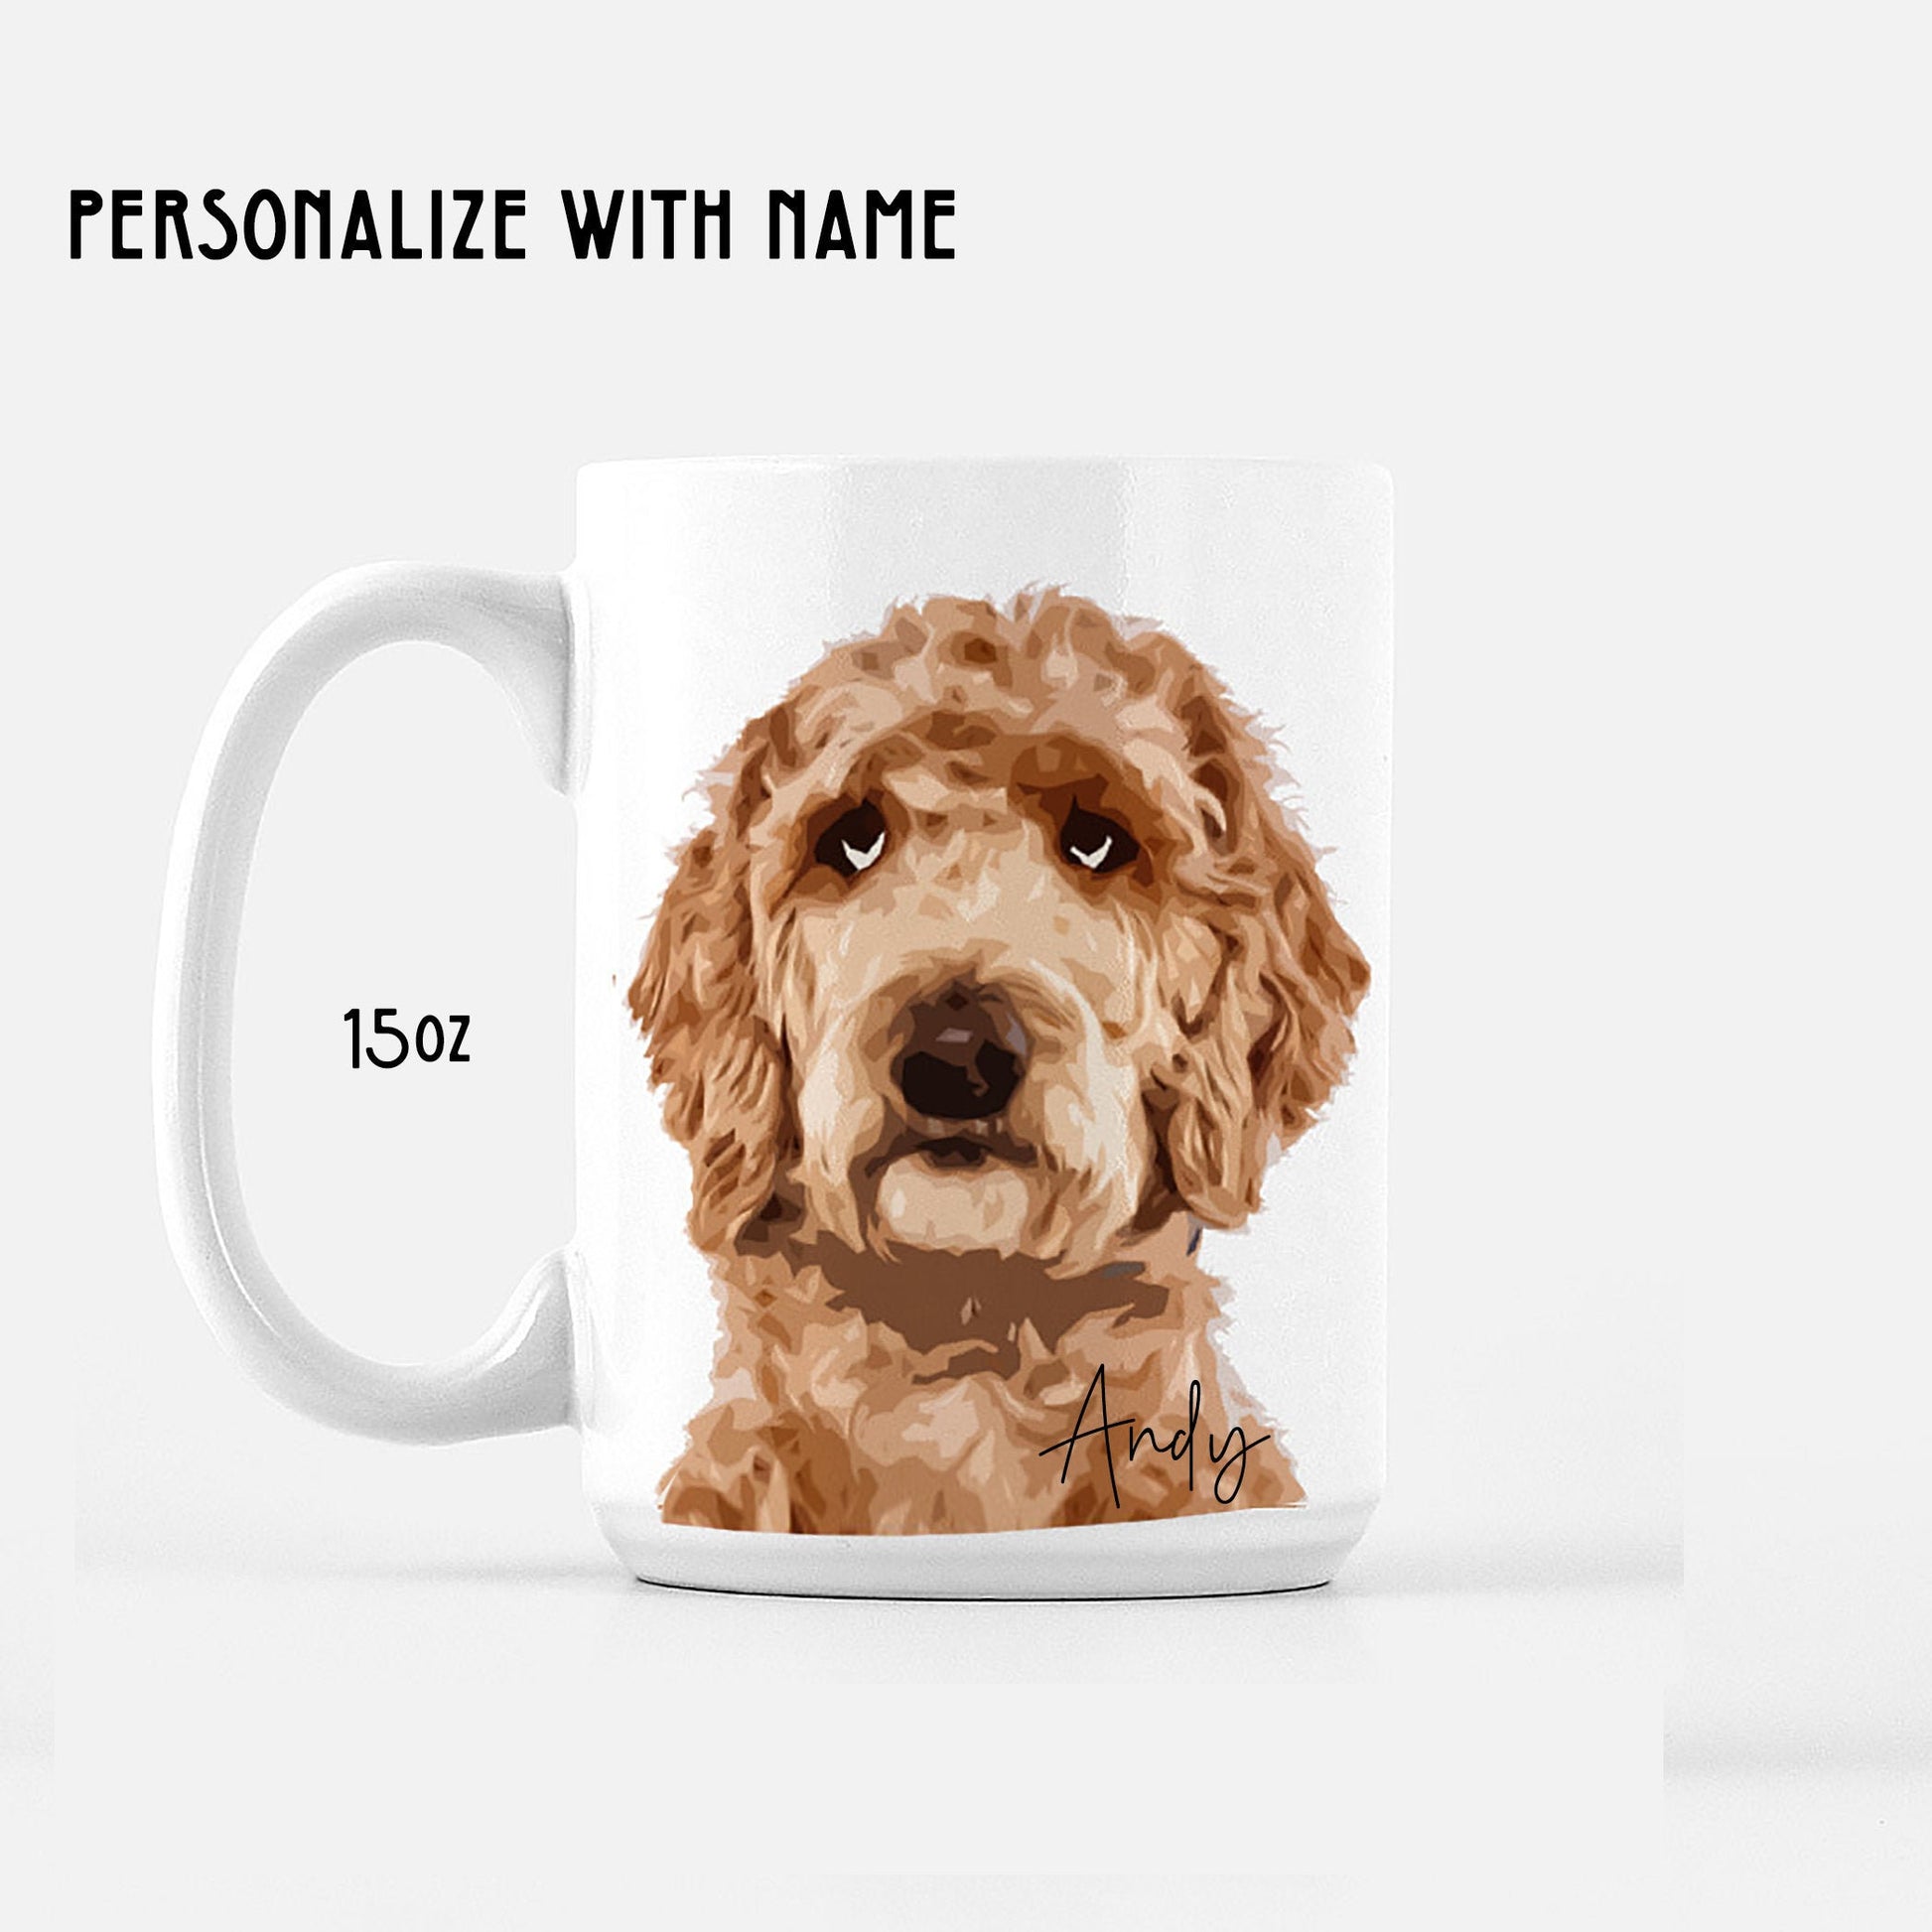 Doodle Mom and Dad Pet gift, Personalized Pet Owner Mug